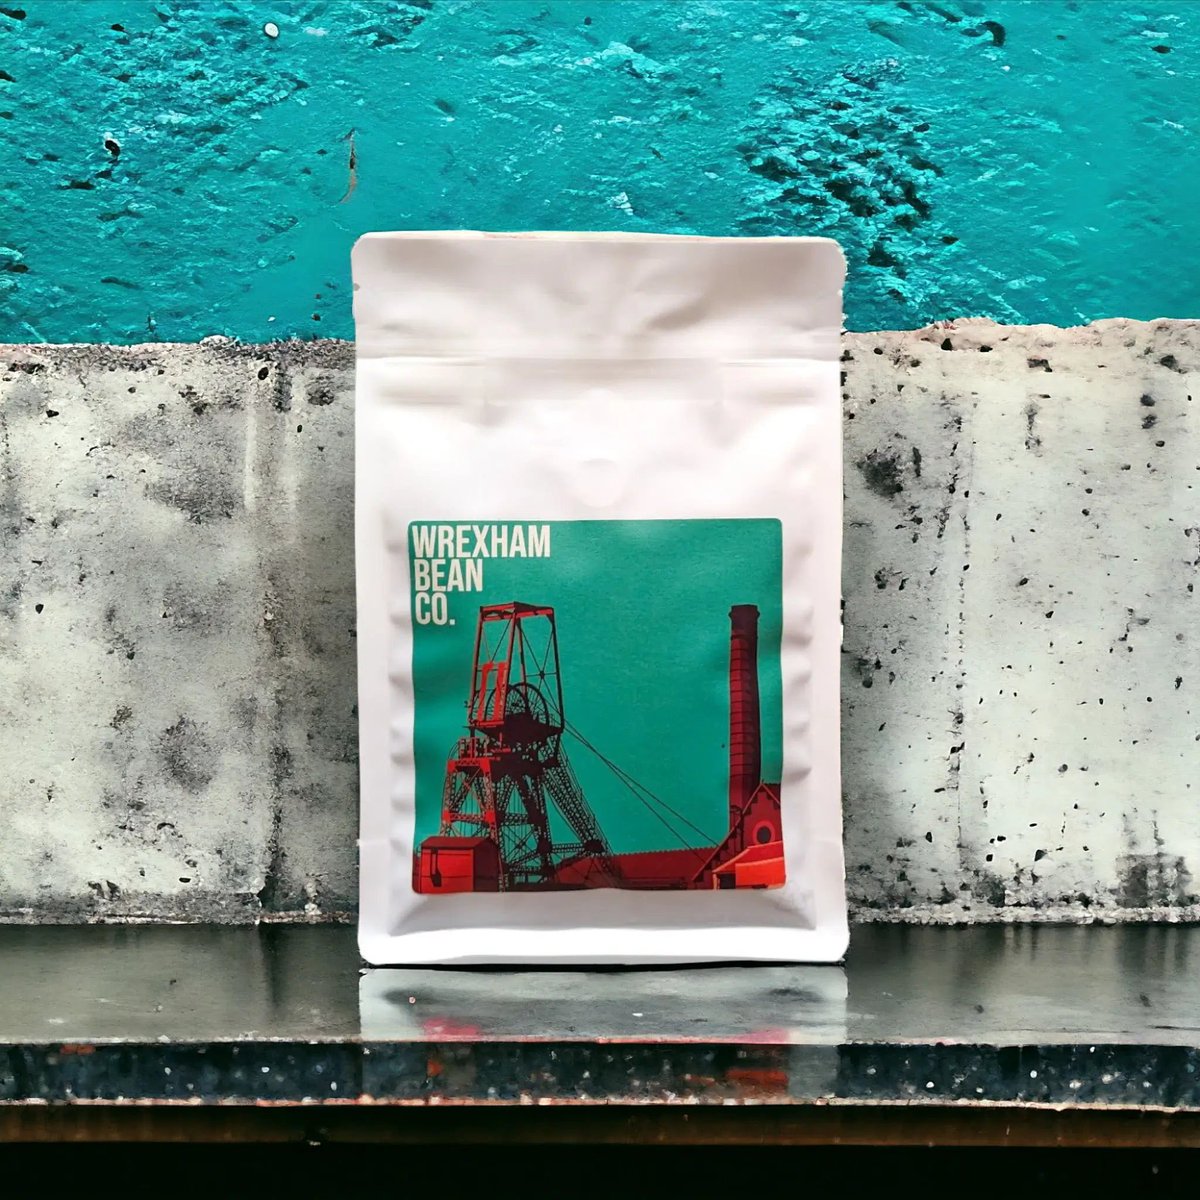 The 1934 Gresford mining disaster forever scarred Wrexham, claiming 266 lives and trapping hundreds more. We honour these fallen heroes with our latest coffee bag artwork, keeping their memory alive. We name this blend “Calon” , Welsh for heart.
#wxm #wrexham #wxmfc #wxmafc